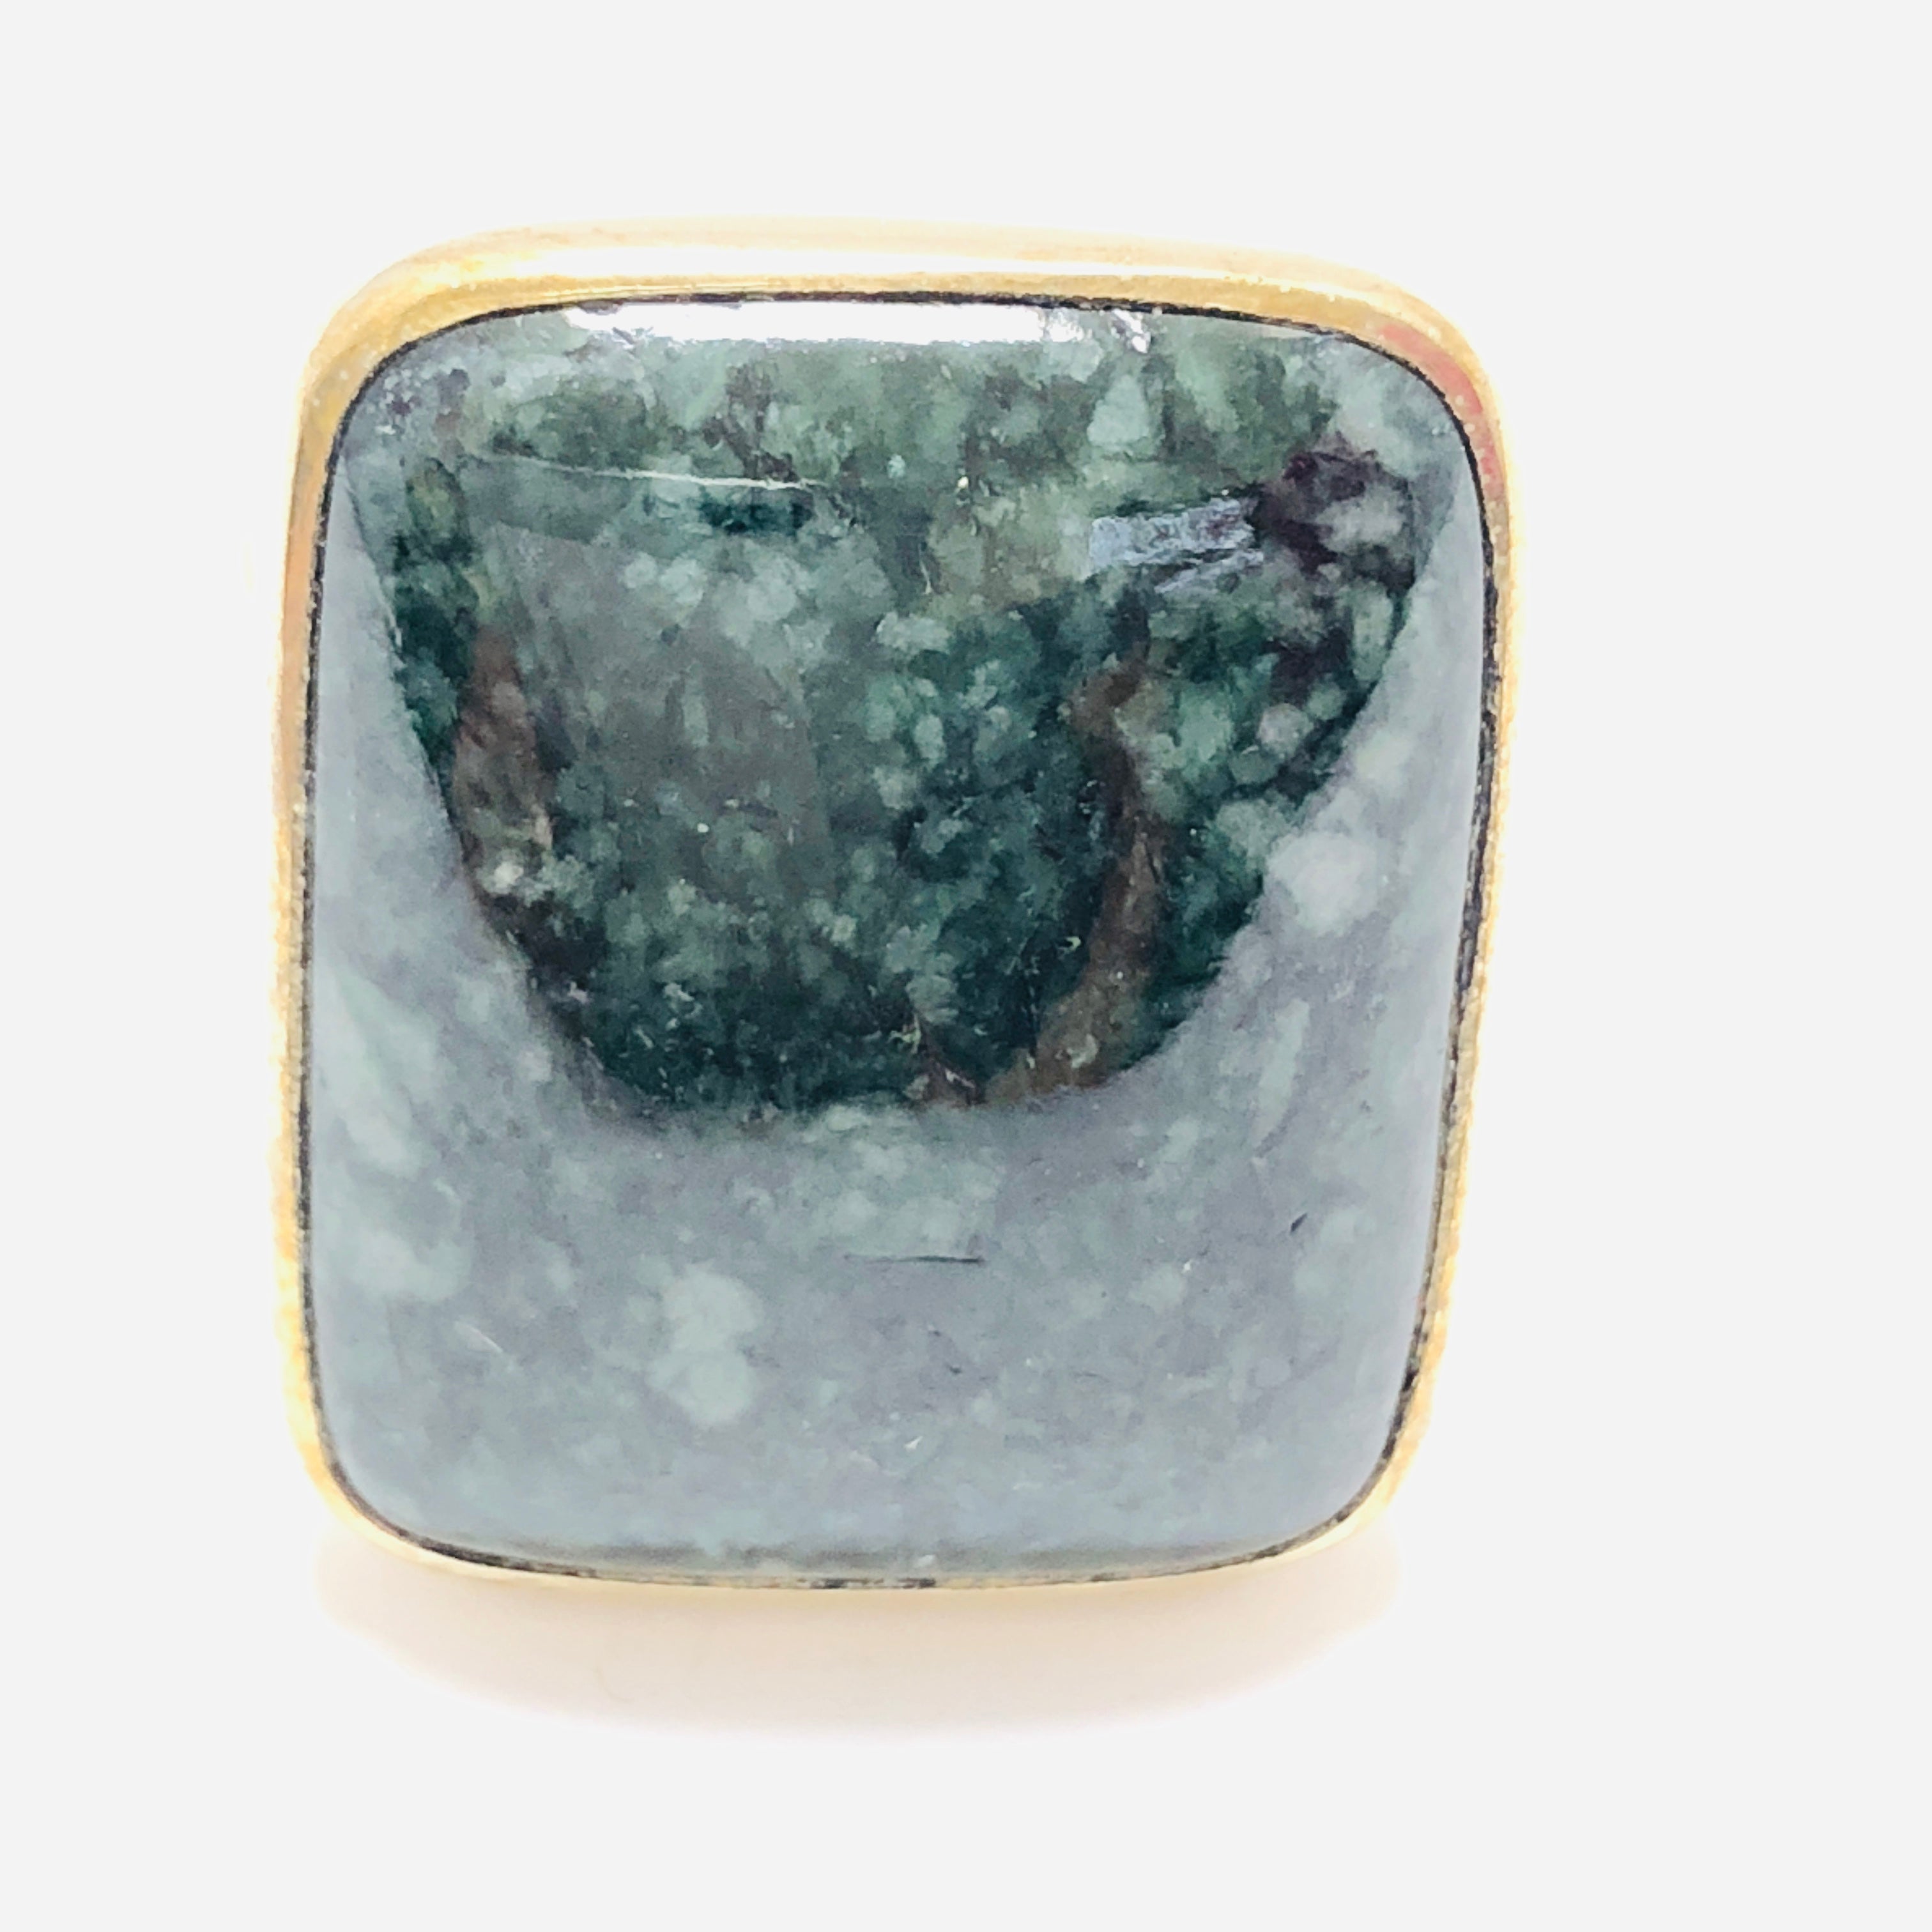 Jade Cocktail Ring Green Square